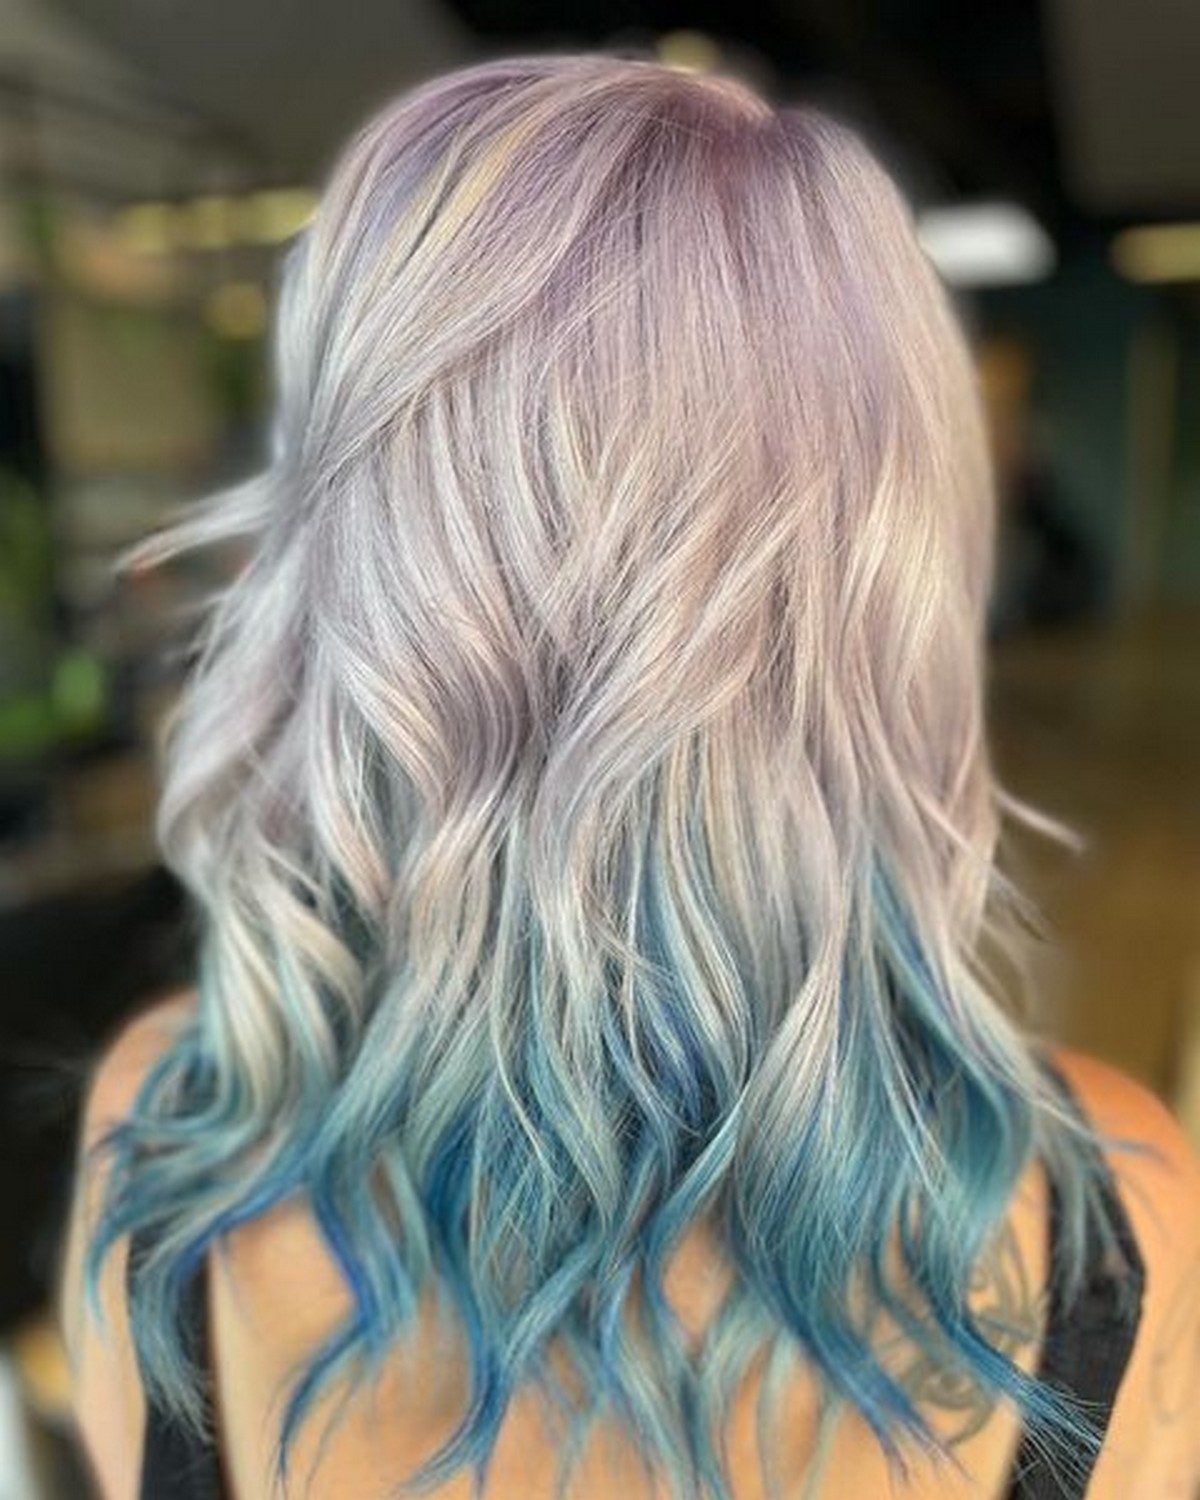 Purple, Blue, and Gray Layers